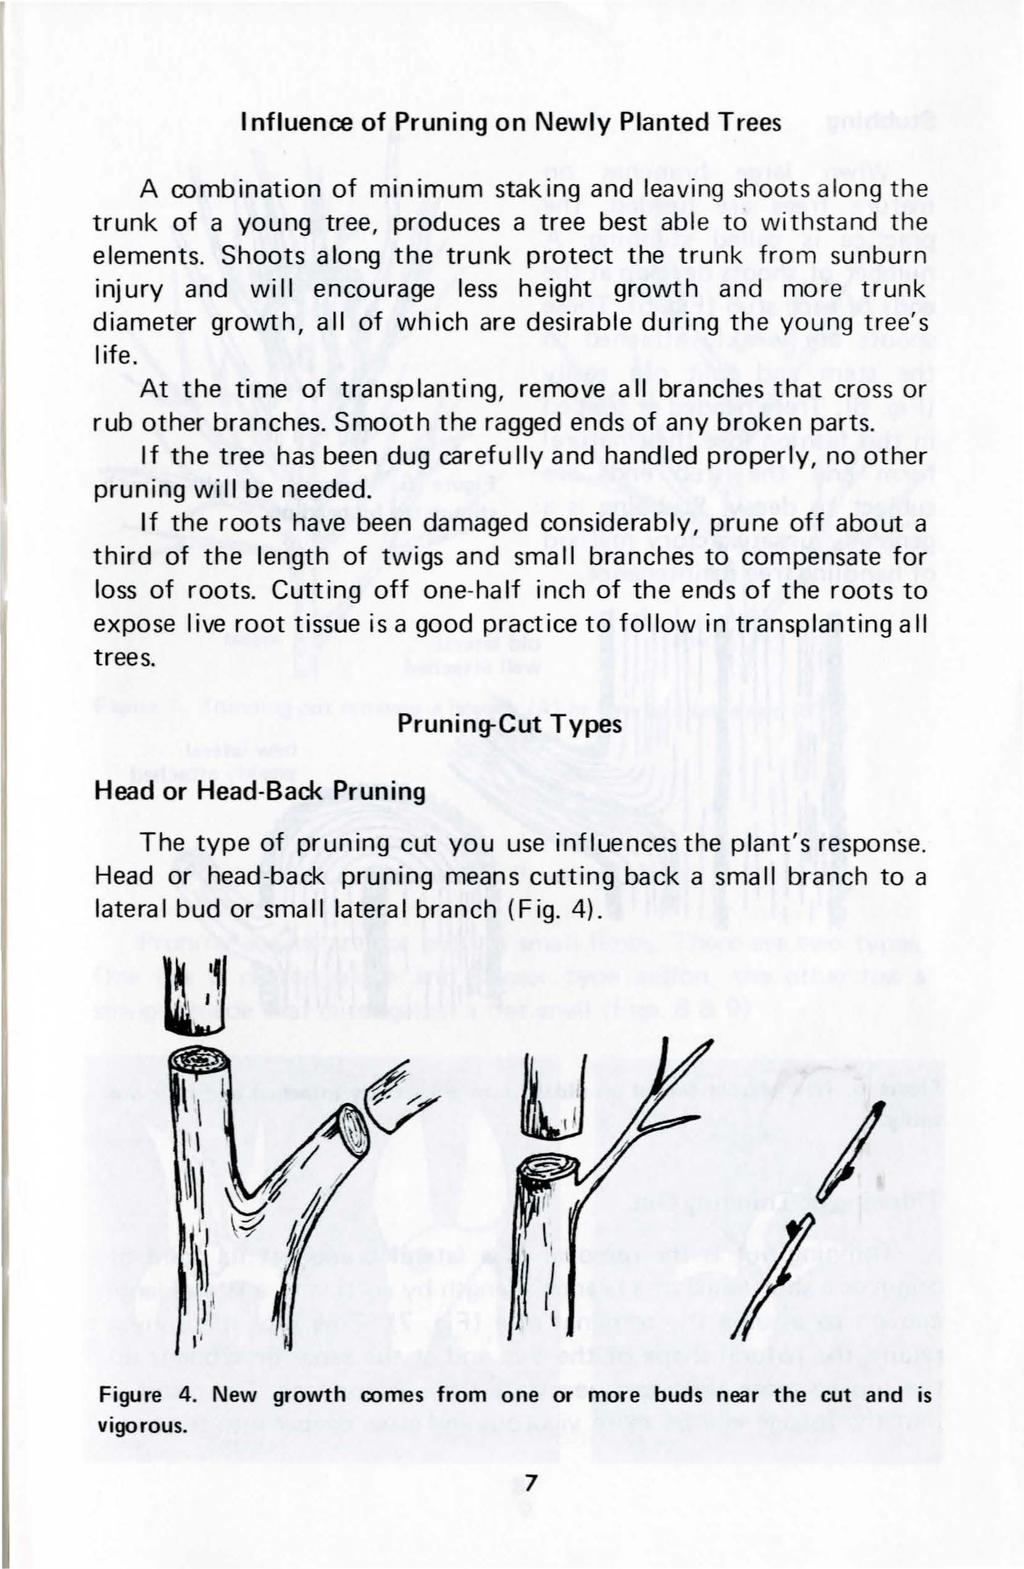 nfluence of Pruning on Newly Planted Trees A combination of minimum staking and leaving shoots along the trunk of a young tree, produces a tree best abl e to withstand the elements.